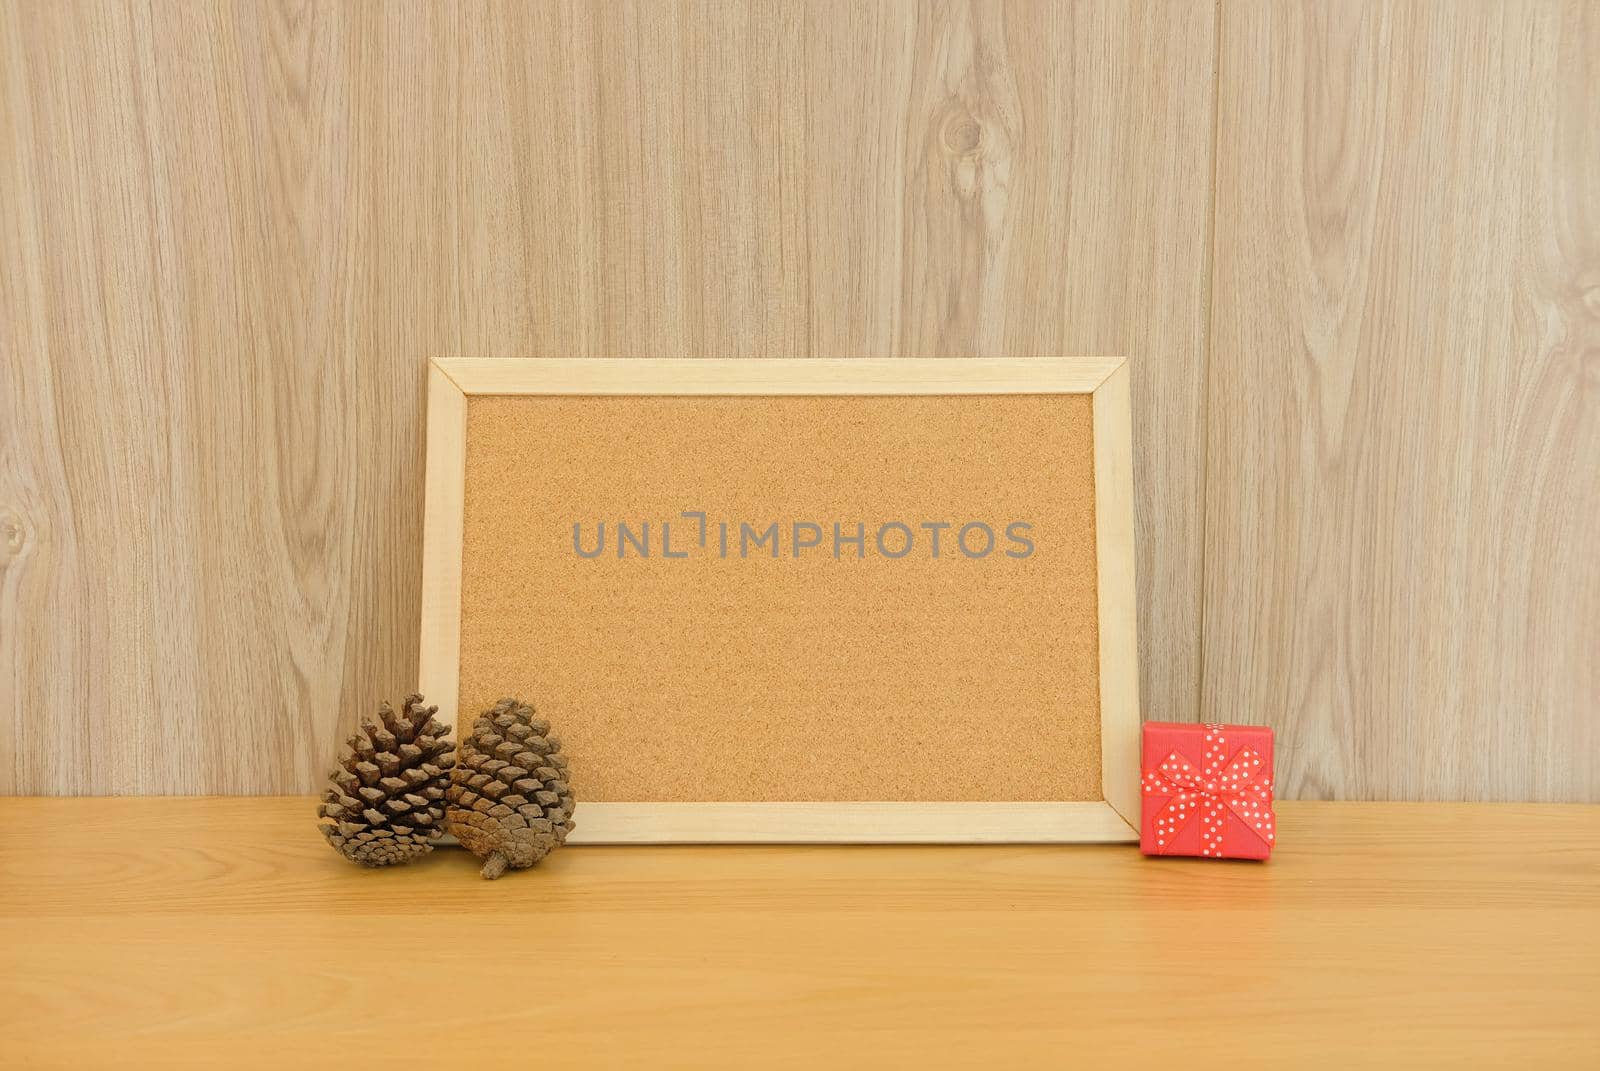 blank cork board with pine cone & gift box. christmas new year holiday festival.